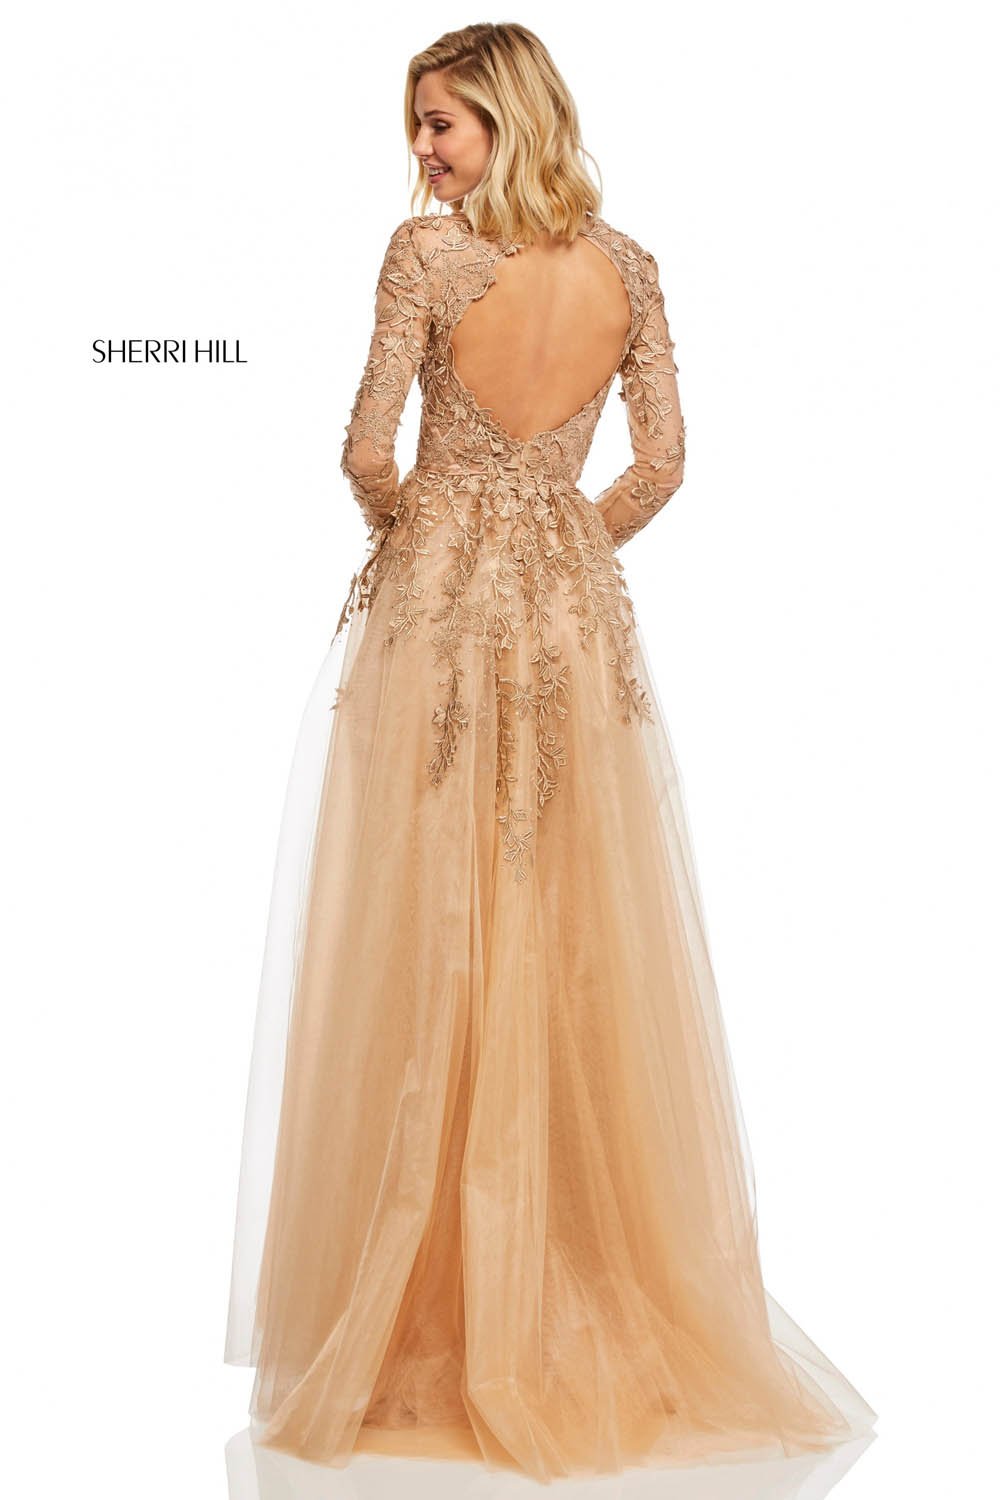 Sherri Hill 52746 dress images in these colors: Red, Ivory, Gold, Light Blue, Black.